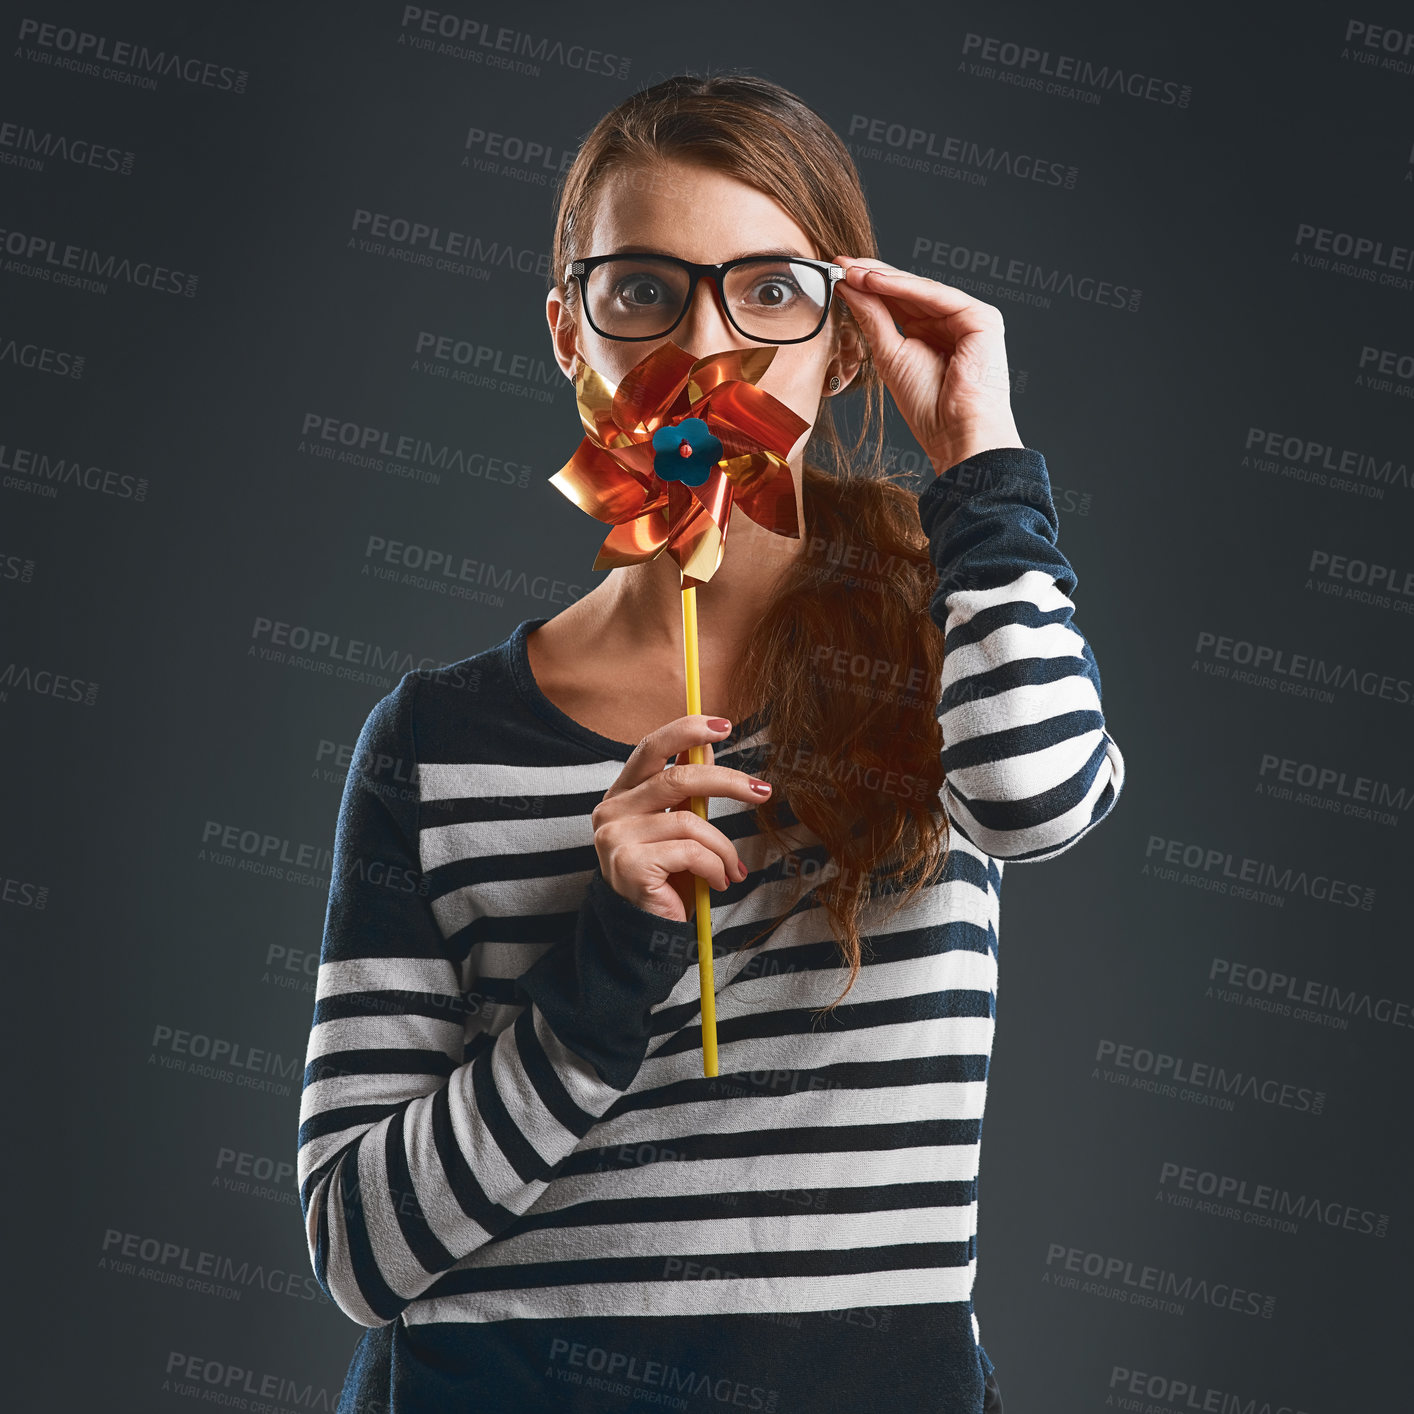 Buy stock photo Studio portrait of an attractive and playful young woman holding a pinwheel and blowing it while standing against a dark background